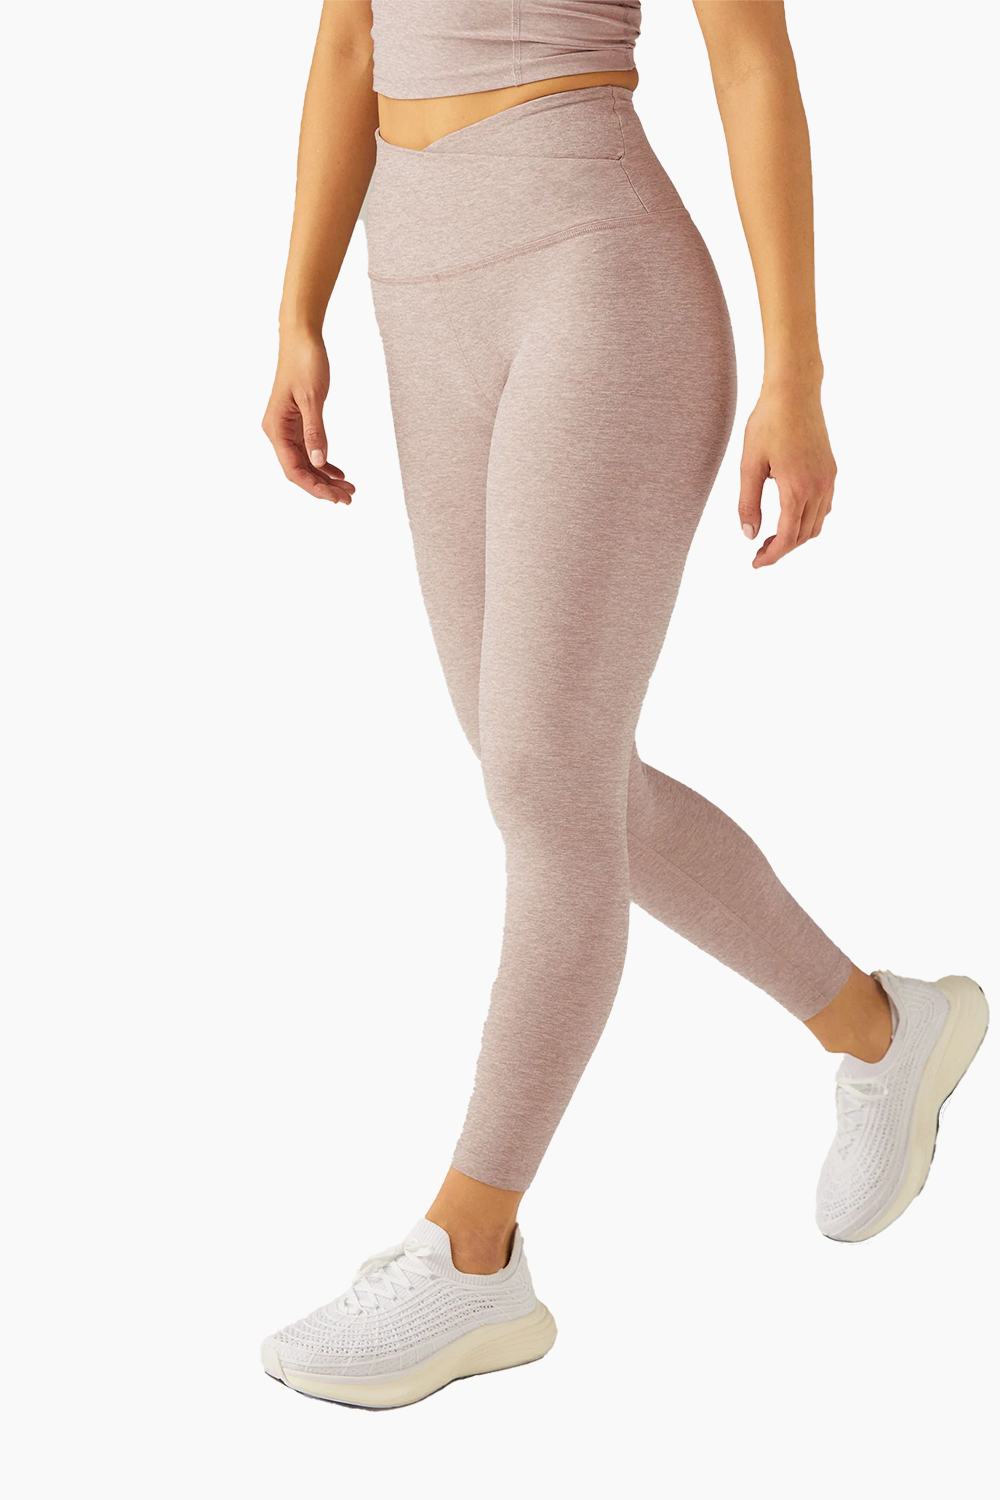 Beyond Yoga Spacedye At Your Leisure High Waisted Midi Legging in Chai